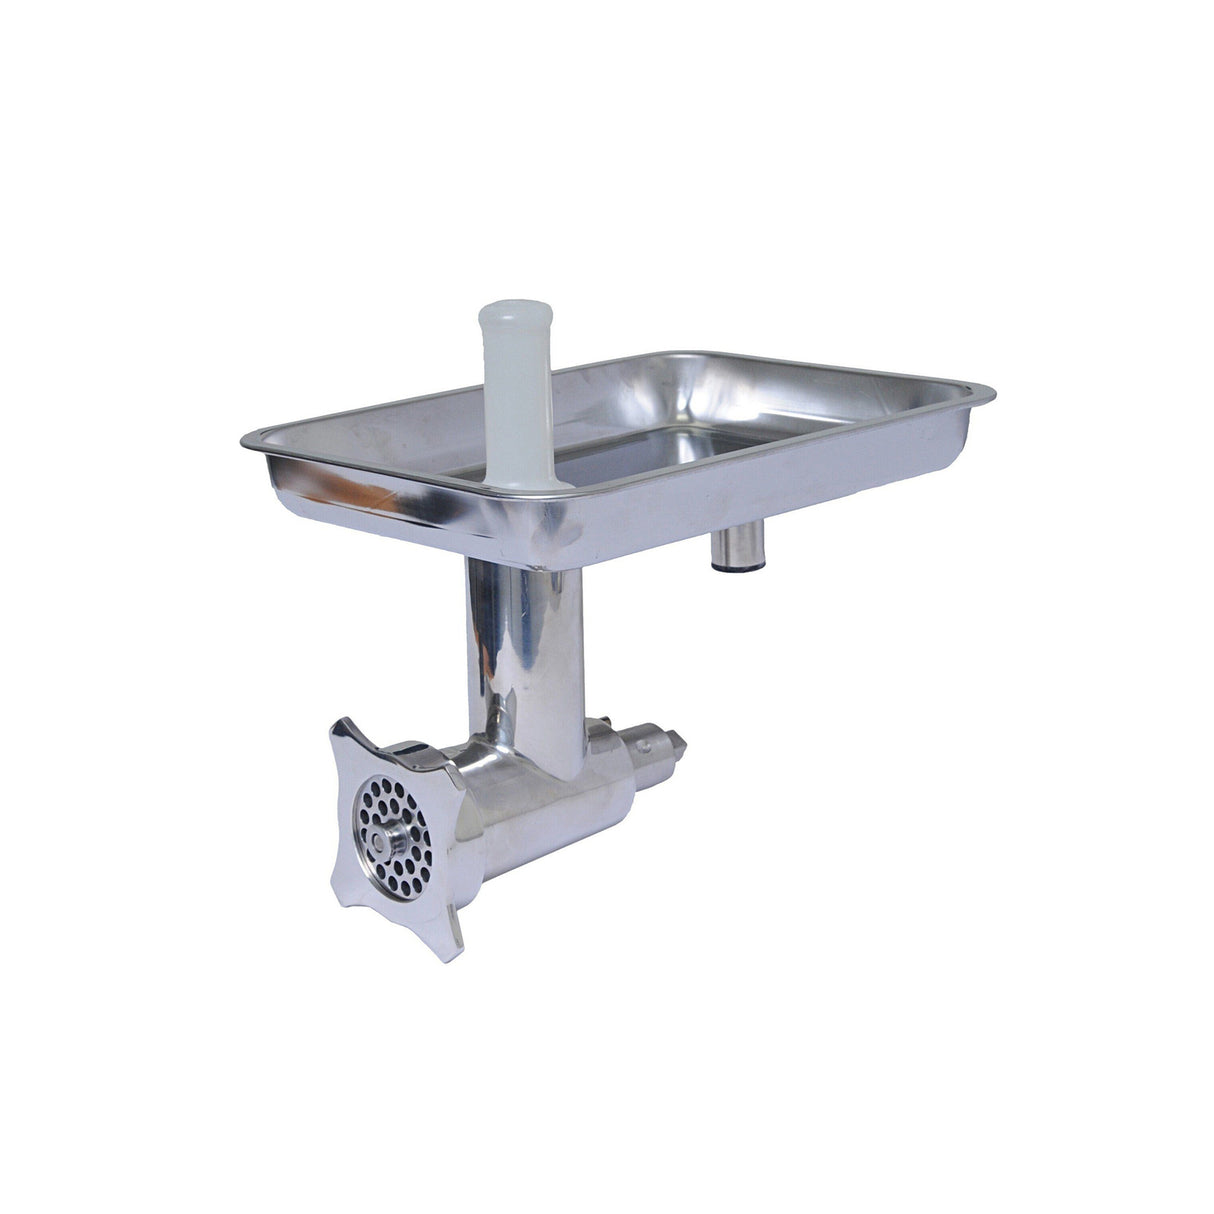 SS812HCPL | Meat Grinder Attachment - Stainless Steel